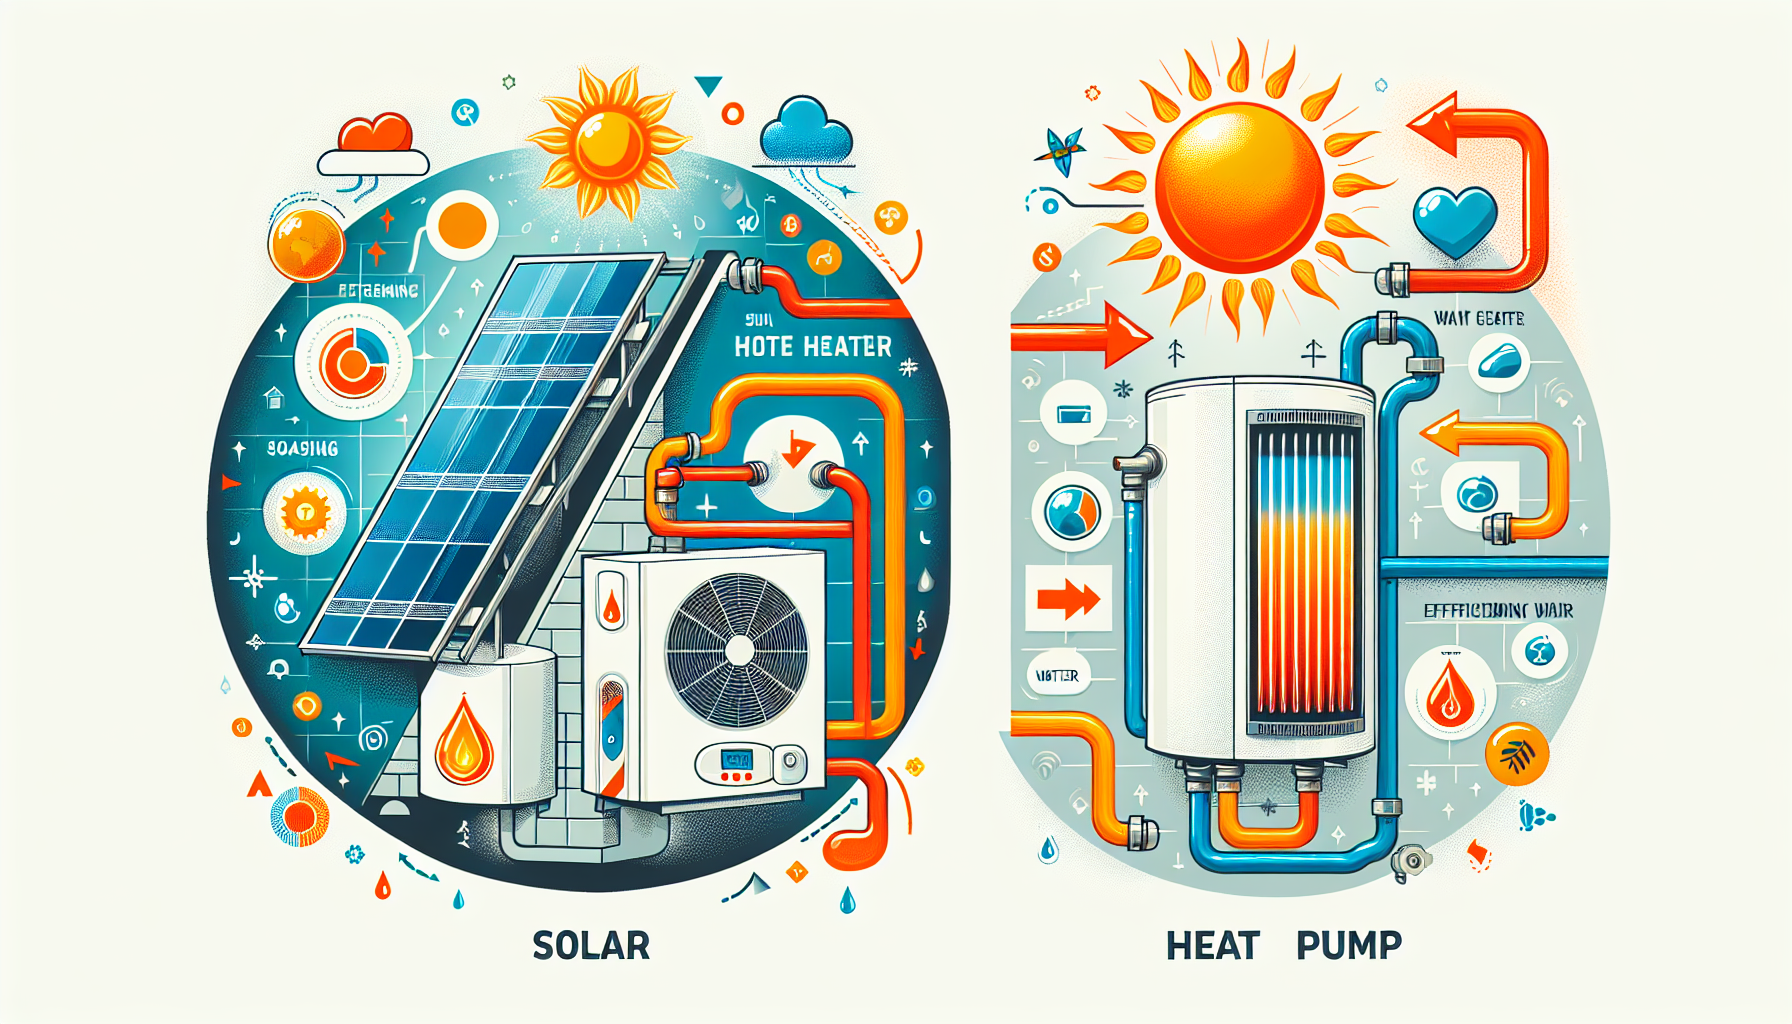 Comparing Solar and Heat Pump Systems